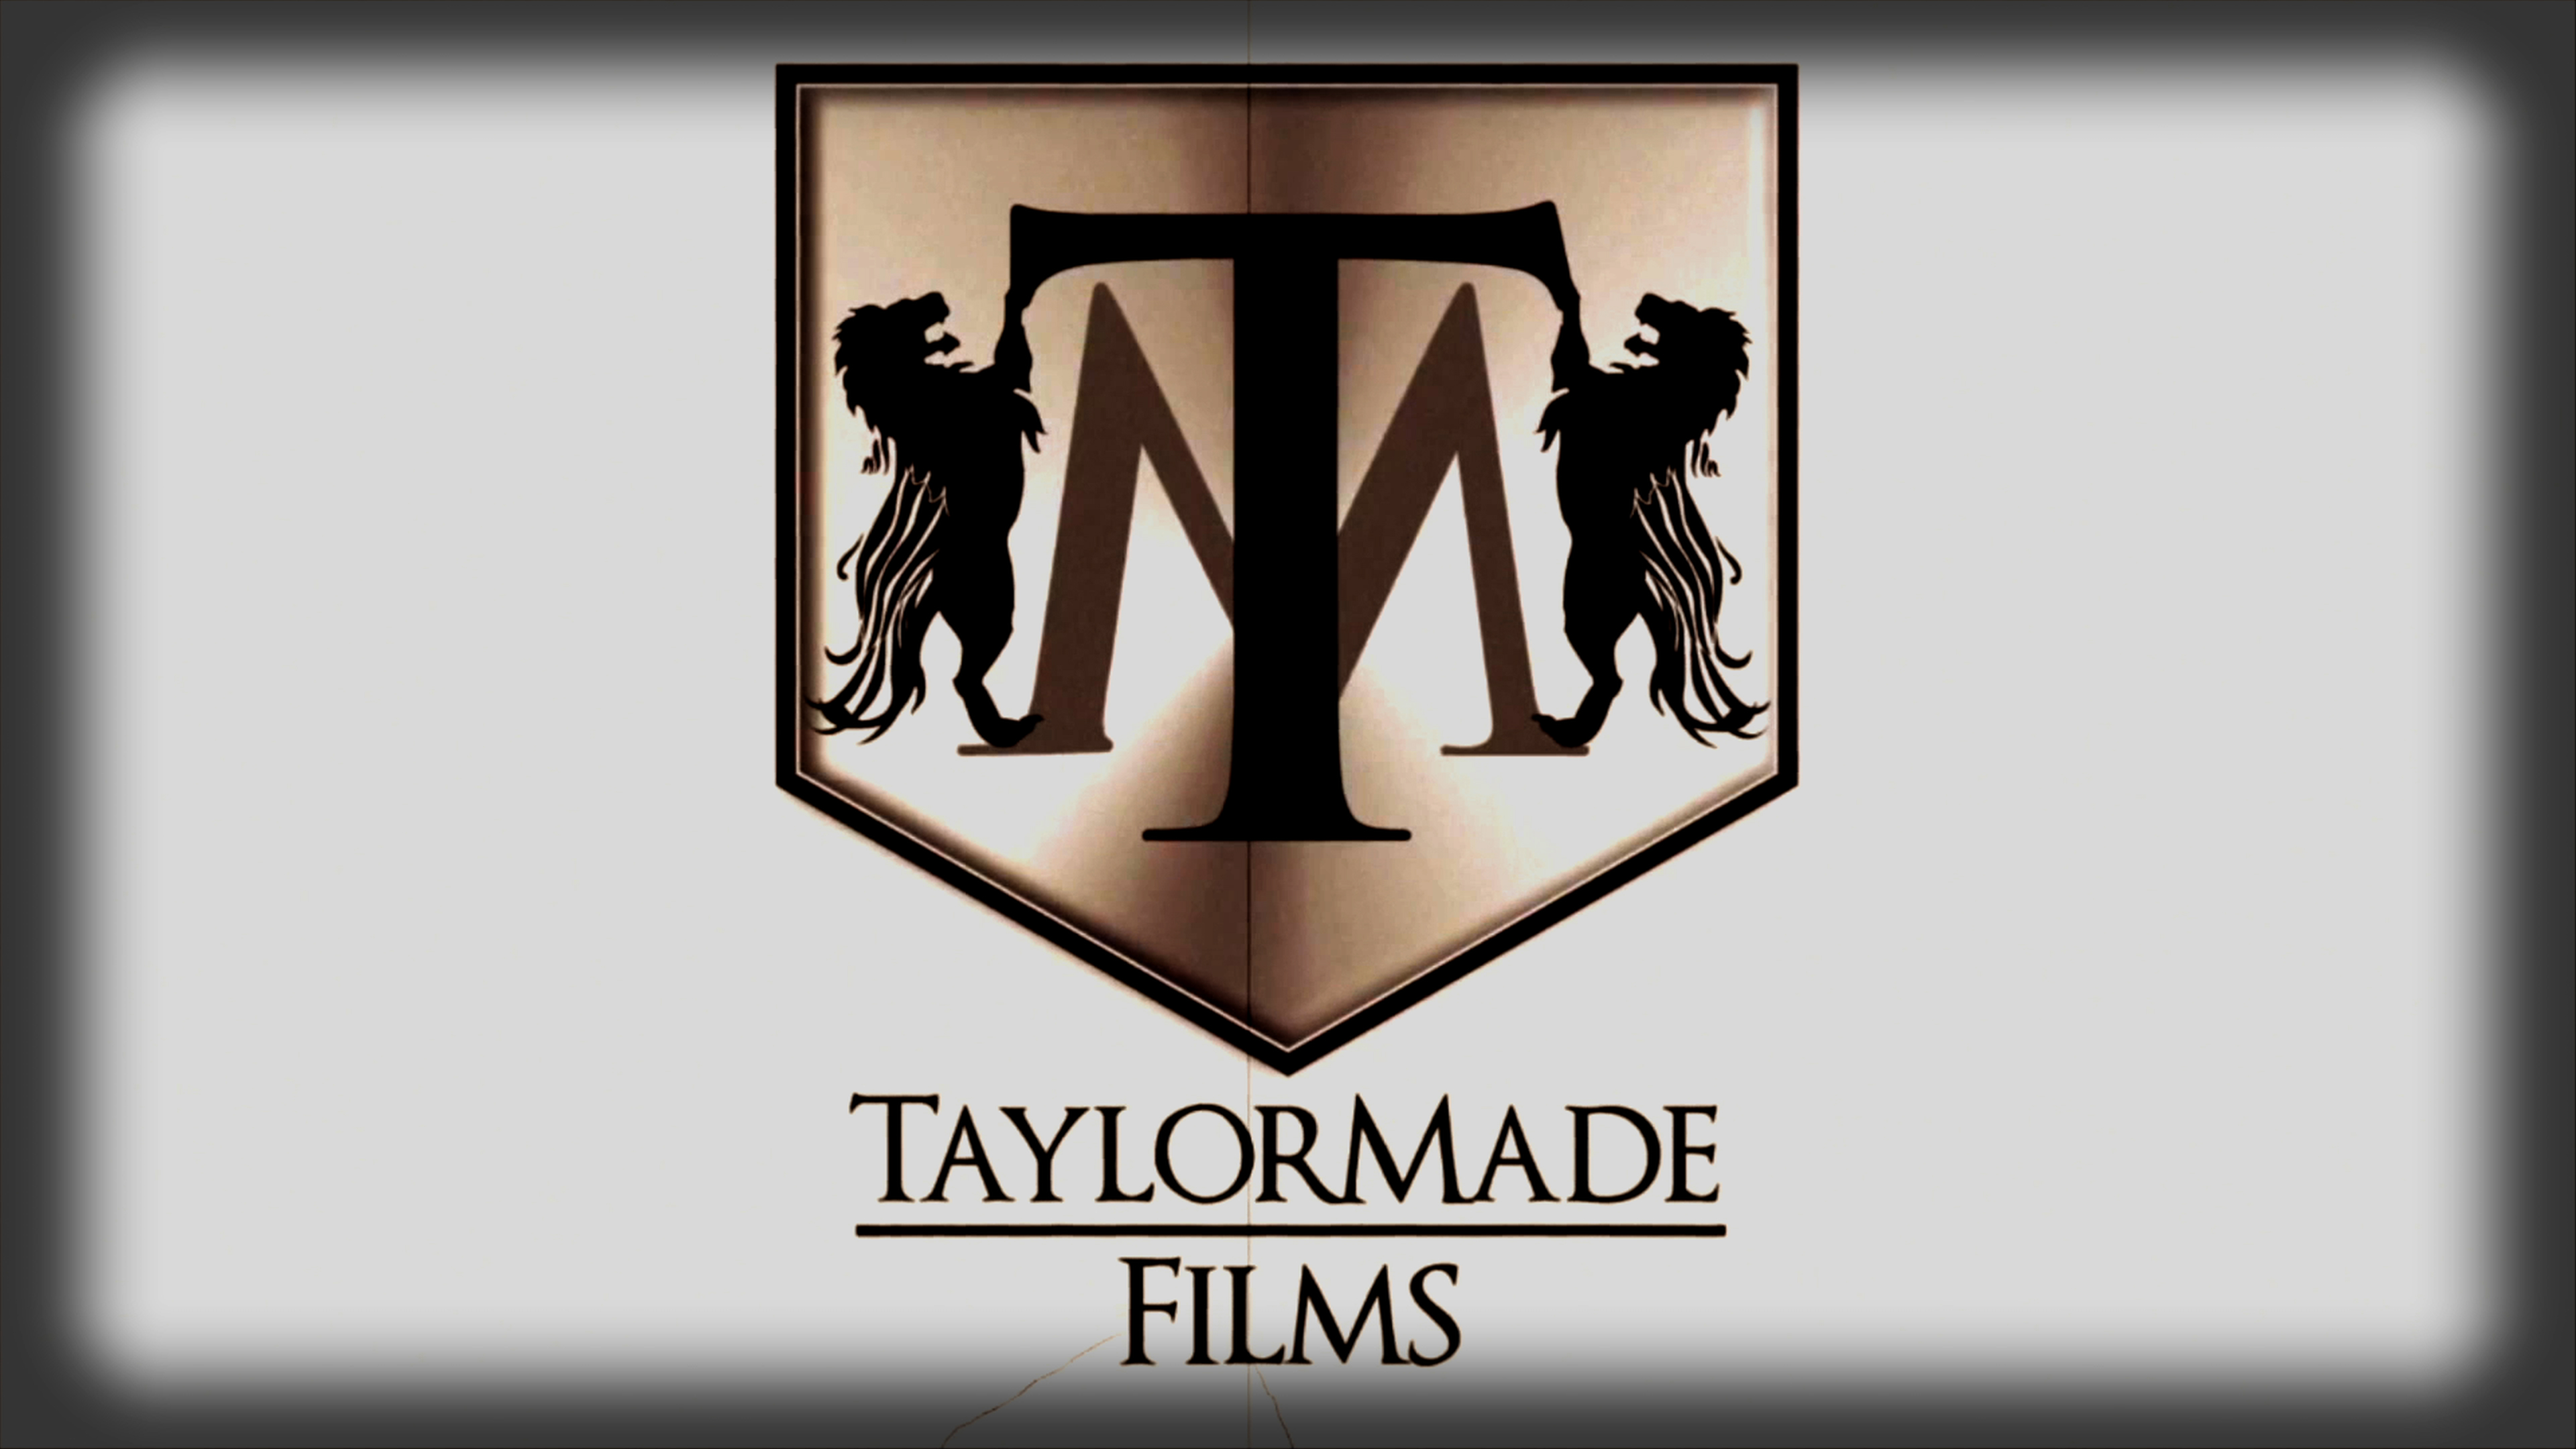 TaylorMade Films